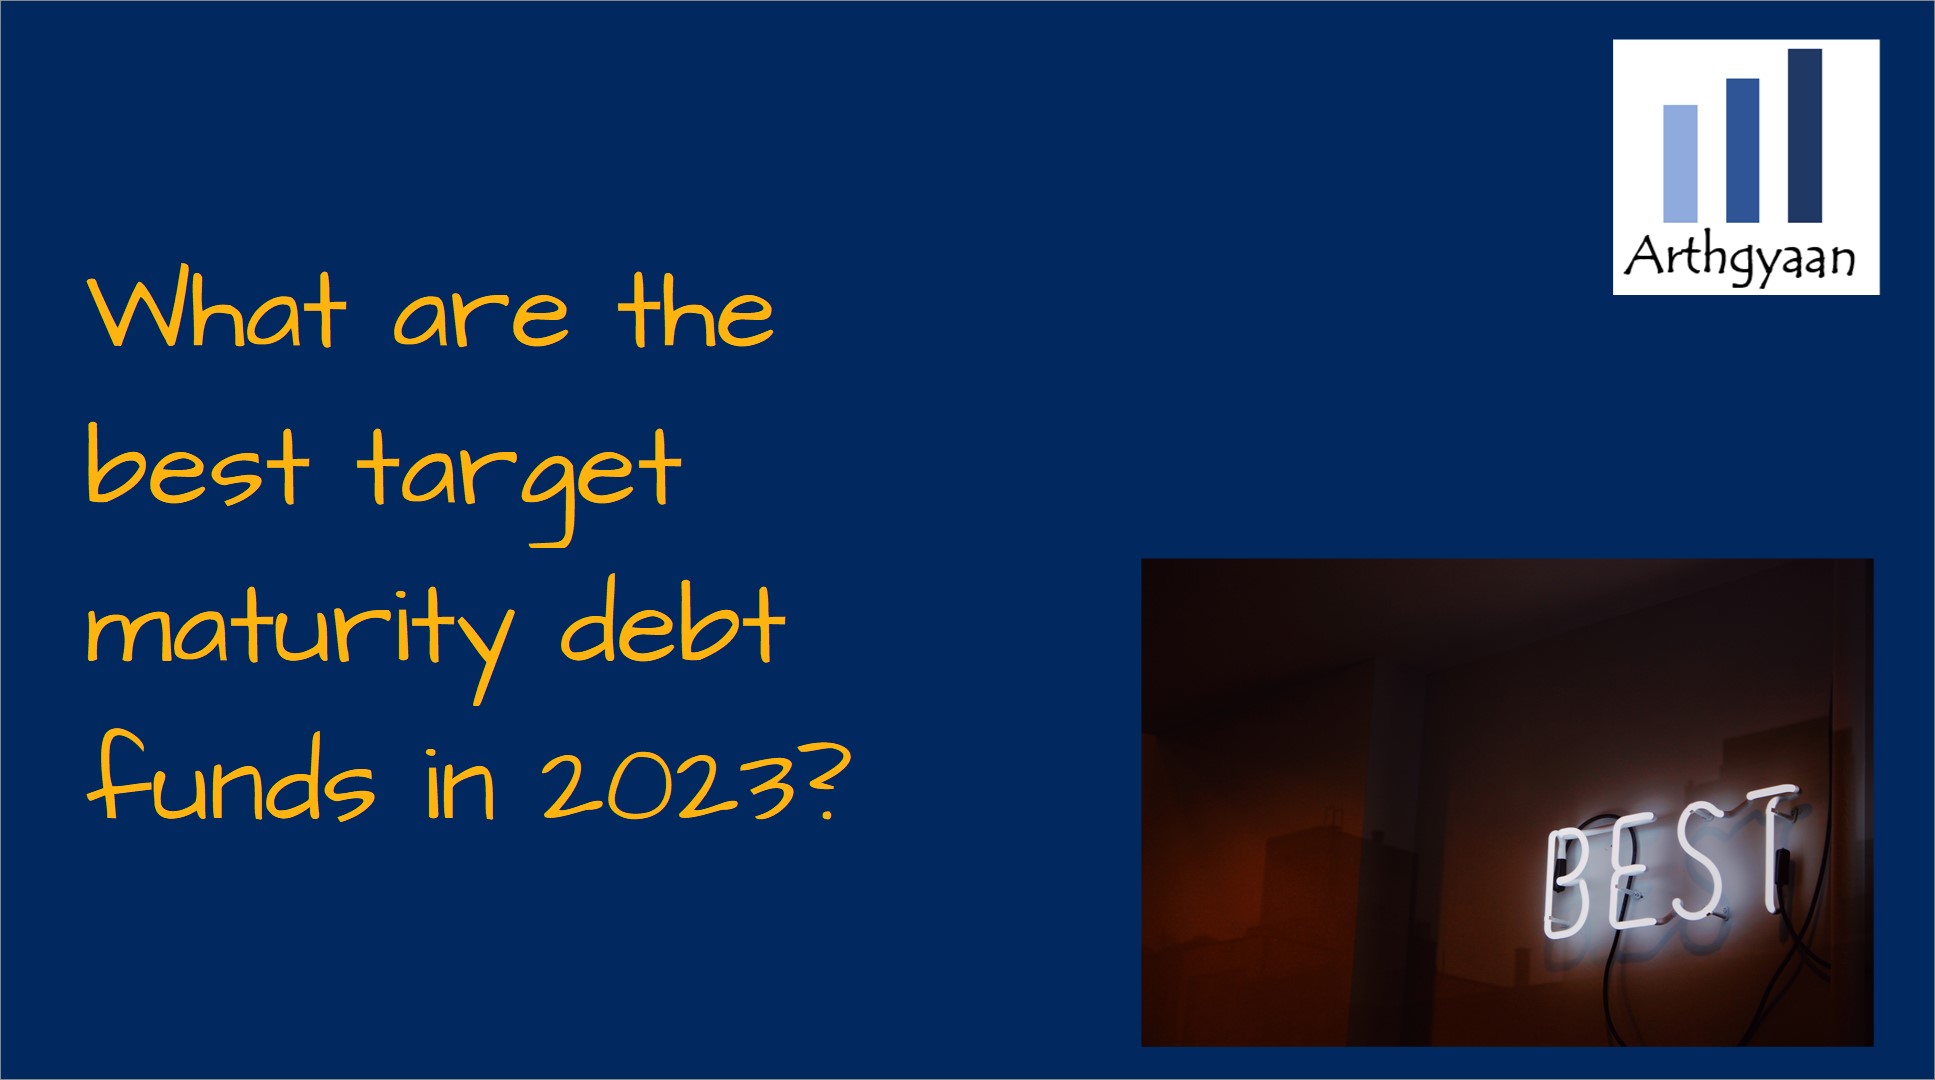 What are the best target maturity debt funds in 2023?